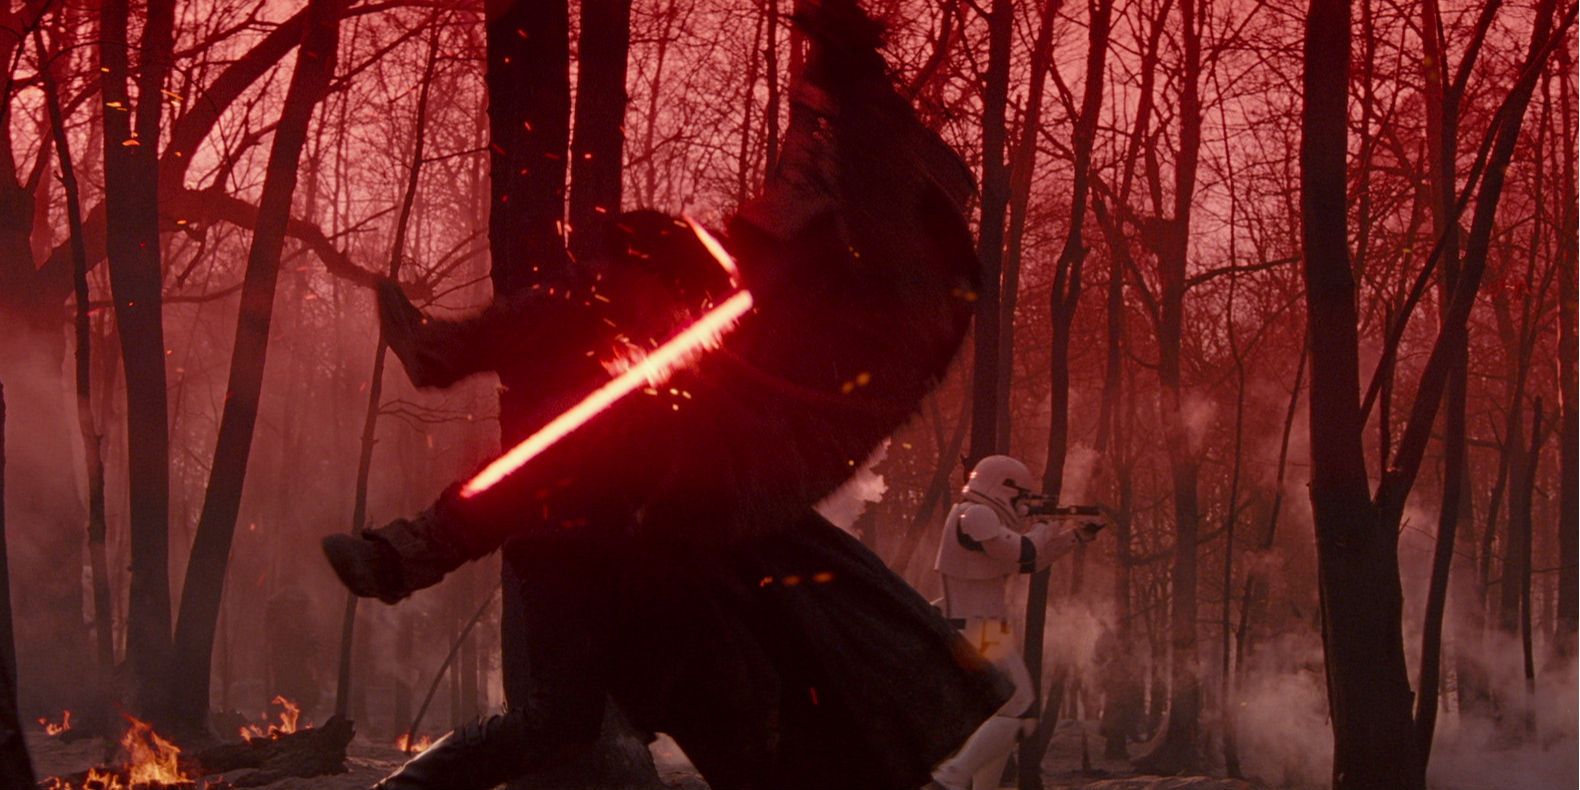 Rise of Skywalker 10 Things About Kylo Ren All Three Trailers Have Shown Us